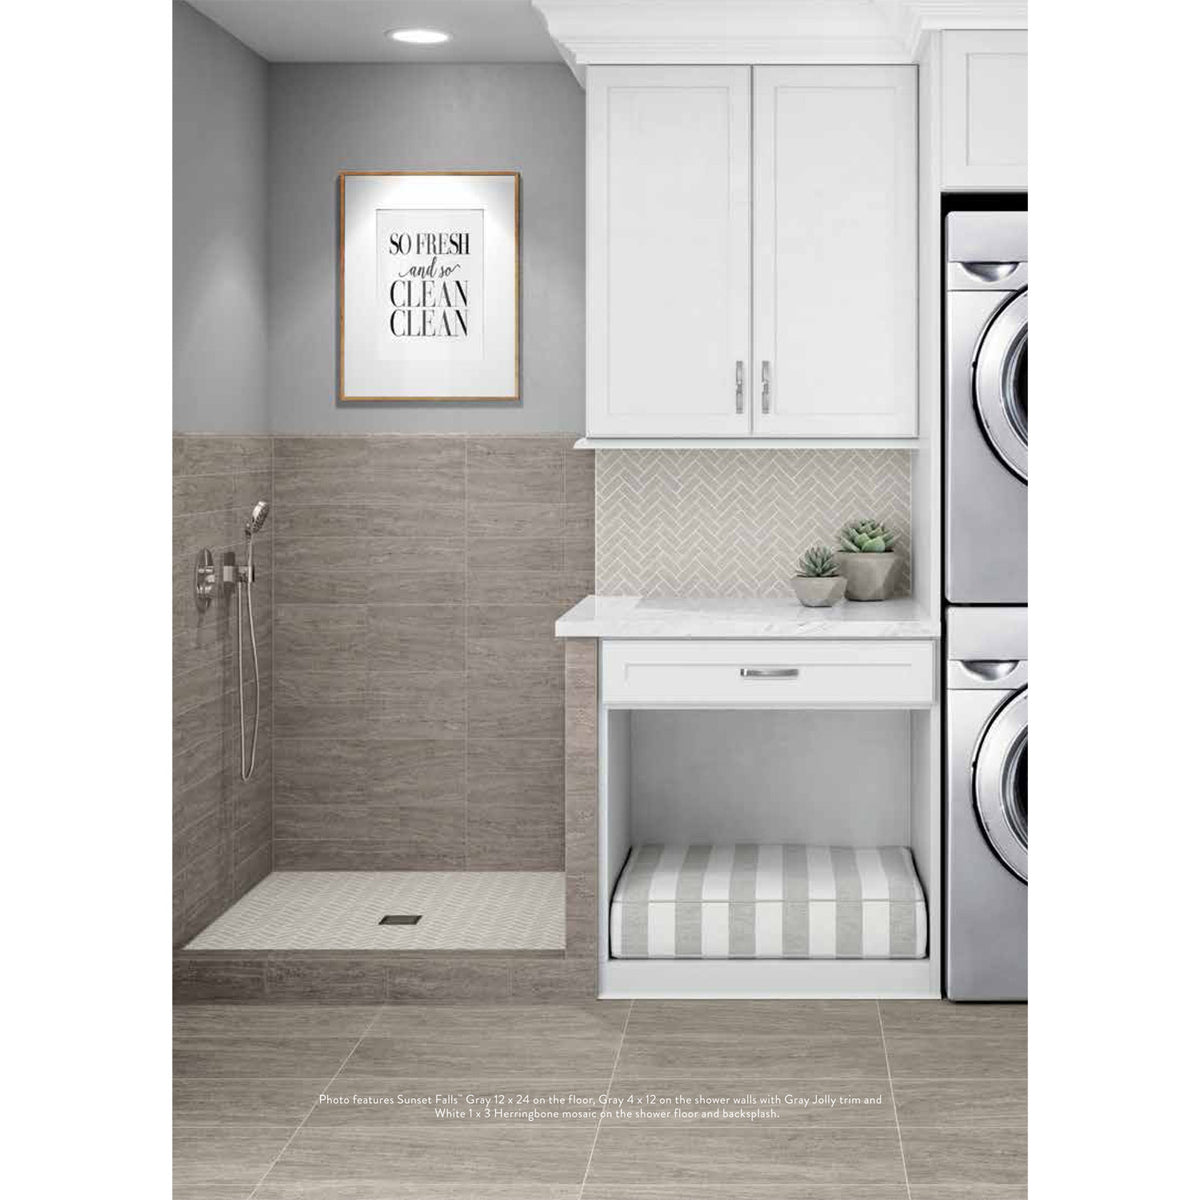 American Olean - Sunset Falls 12&quot; x 24&quot; Floor Tile - Gray SF17 Installed